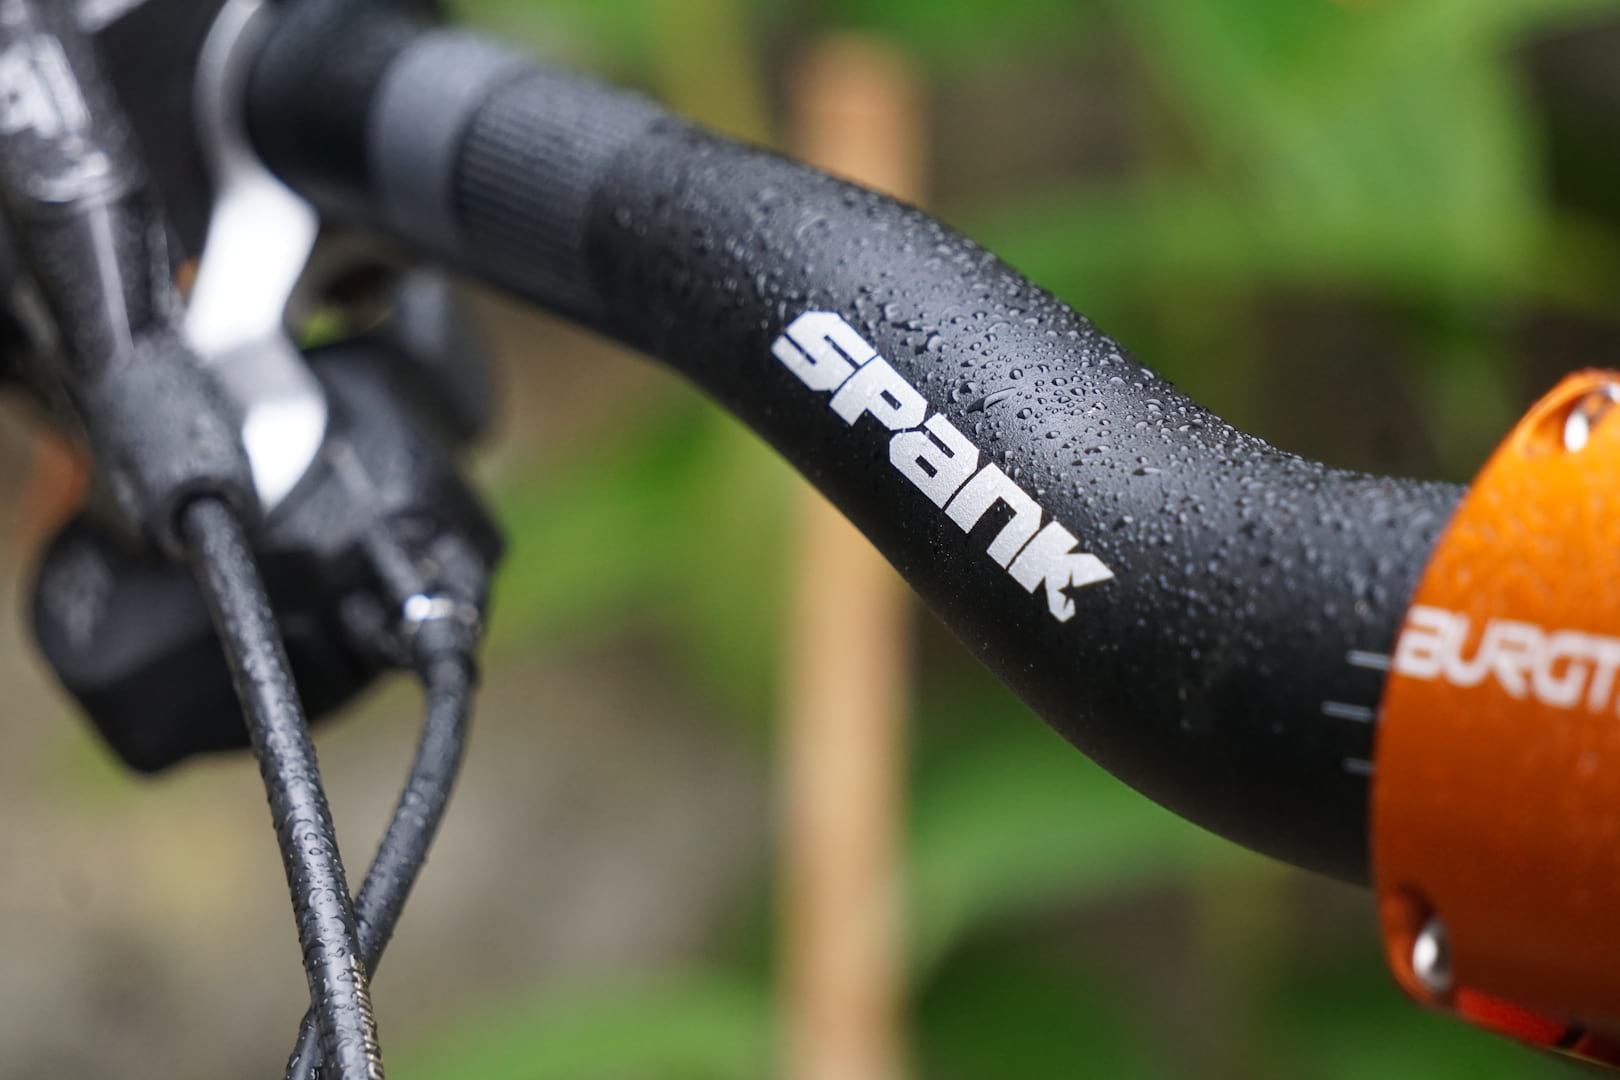 spank spike 35 vibrocore review